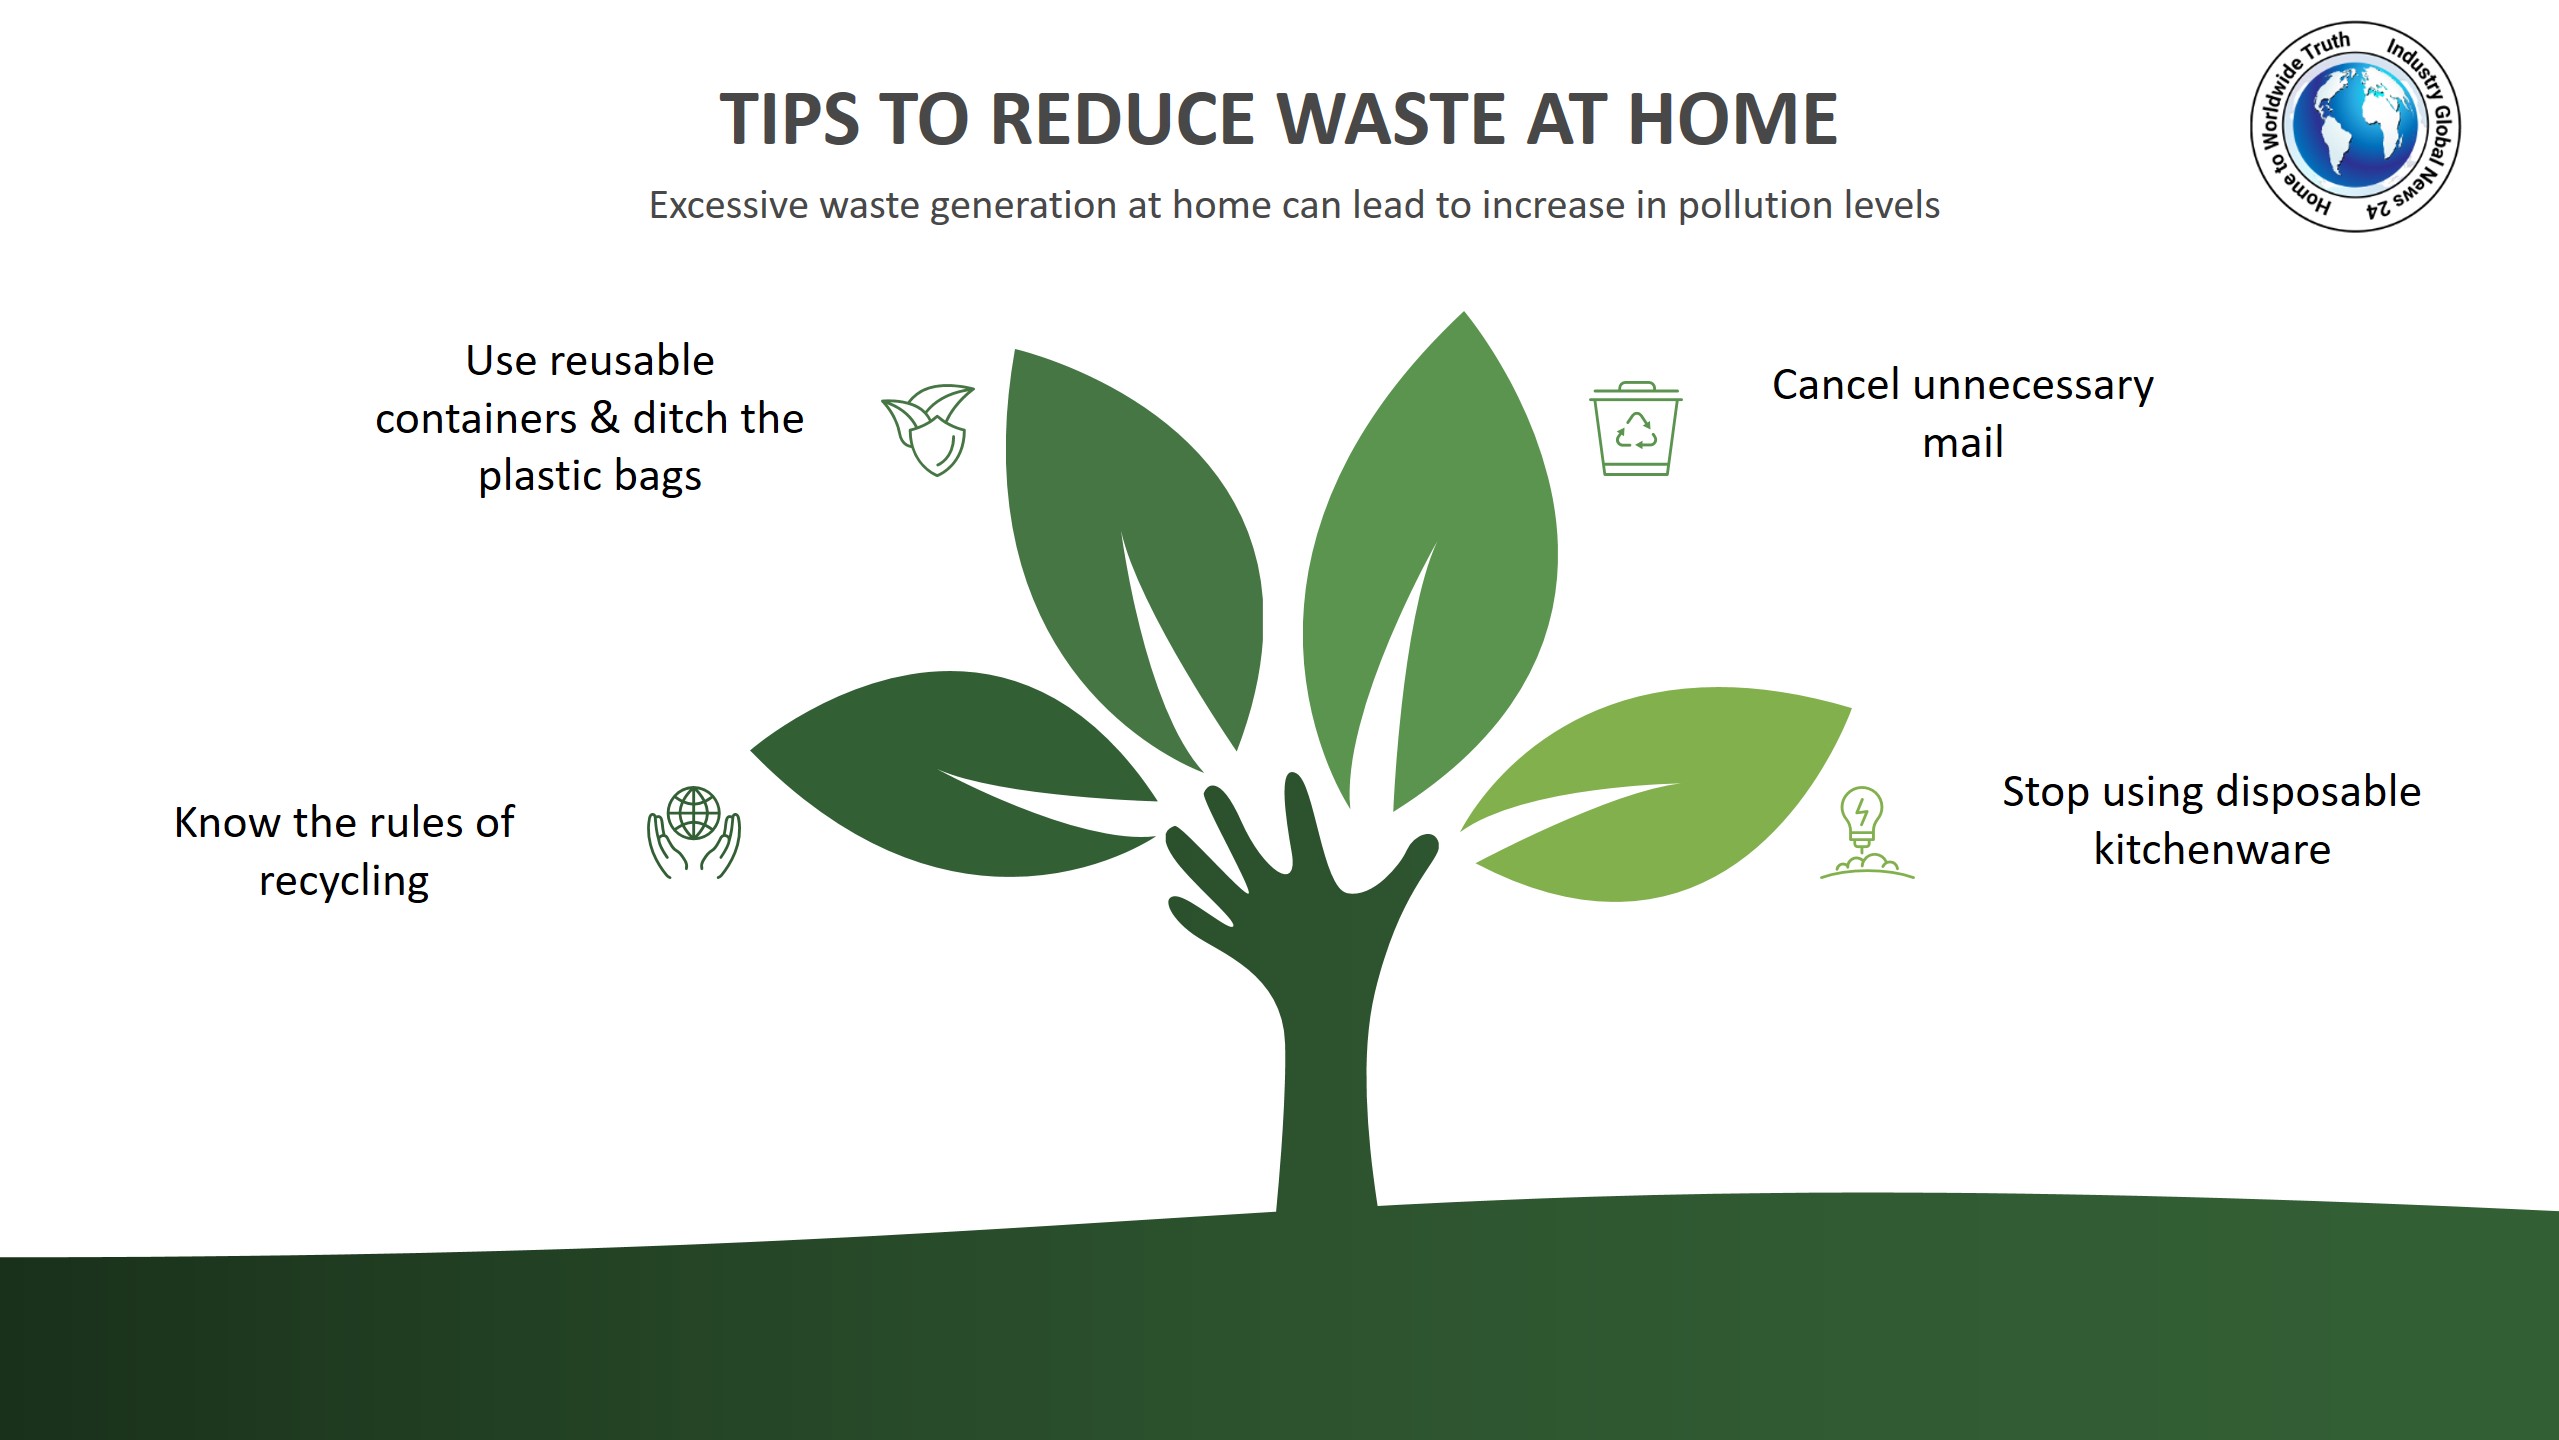 Tips to reduce waste at home